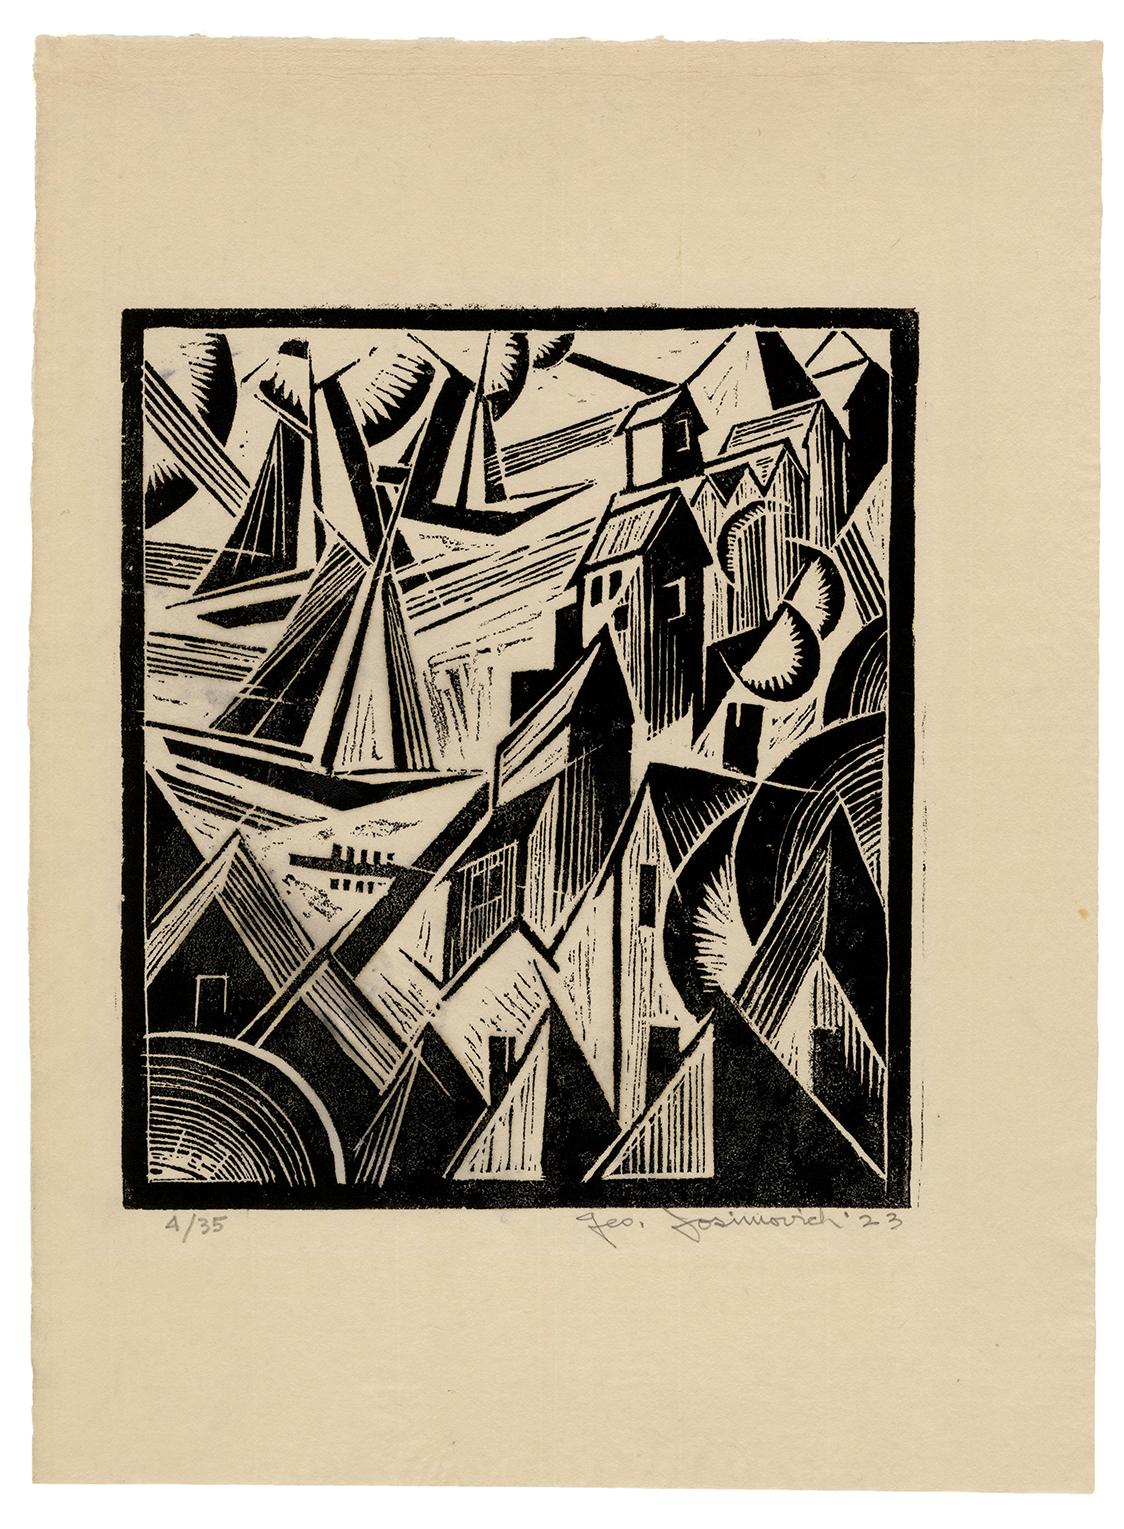 Harbor with Sailboats — Early 20th-Century Modernism - Print by George Josimovich